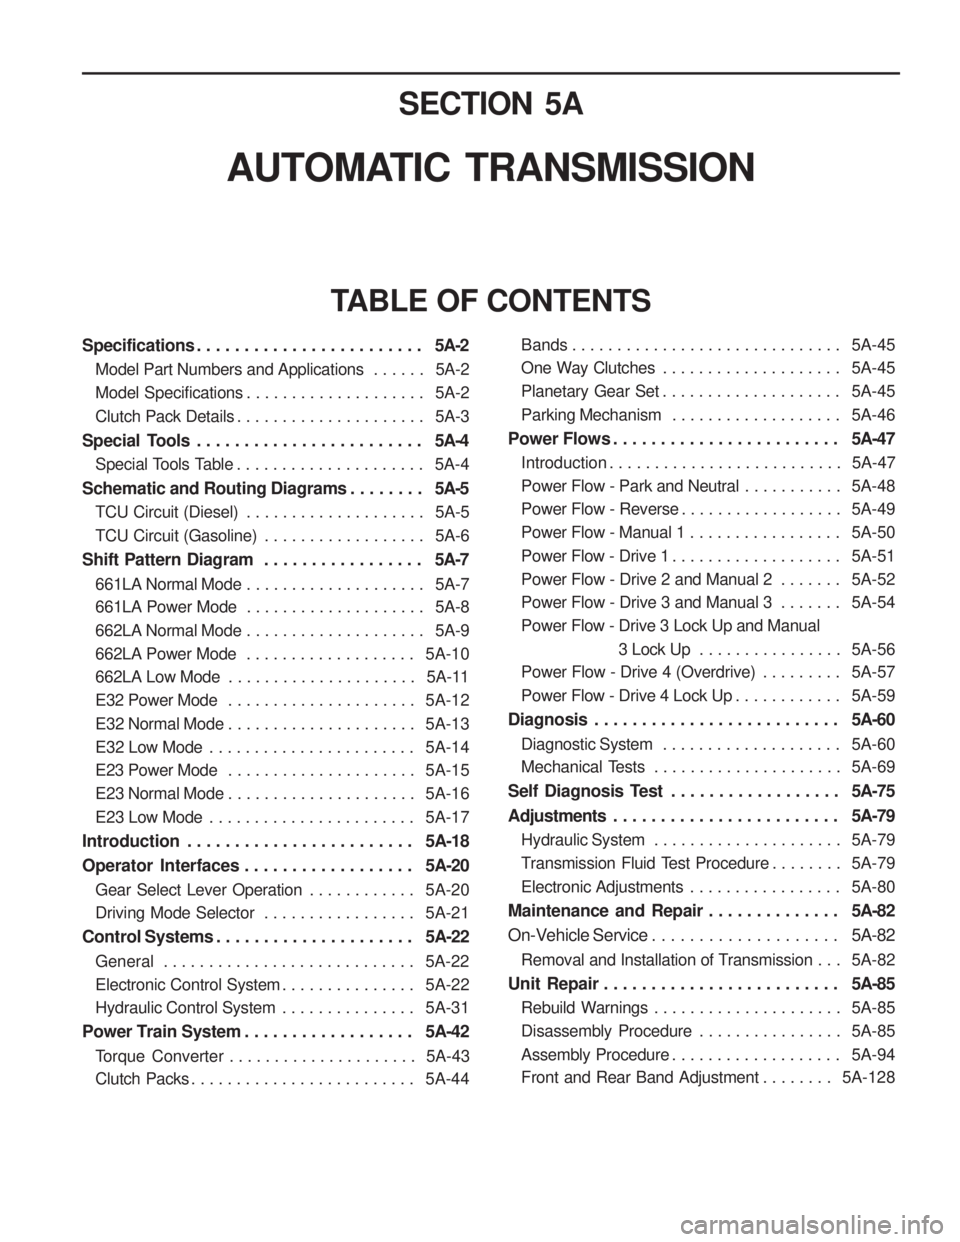 SSANGYONG MUSSO 2003  Service Manual SECTION 5A
AUTOMATIC  TRANSMISSION
TABLE OF CONTENTS
Specifications . . . . . . . . . . . . . . . . . . . . . . . .  5A-2
Model Part Numbers and Applications . . . . . .  5A-2 
Model Specifications . 